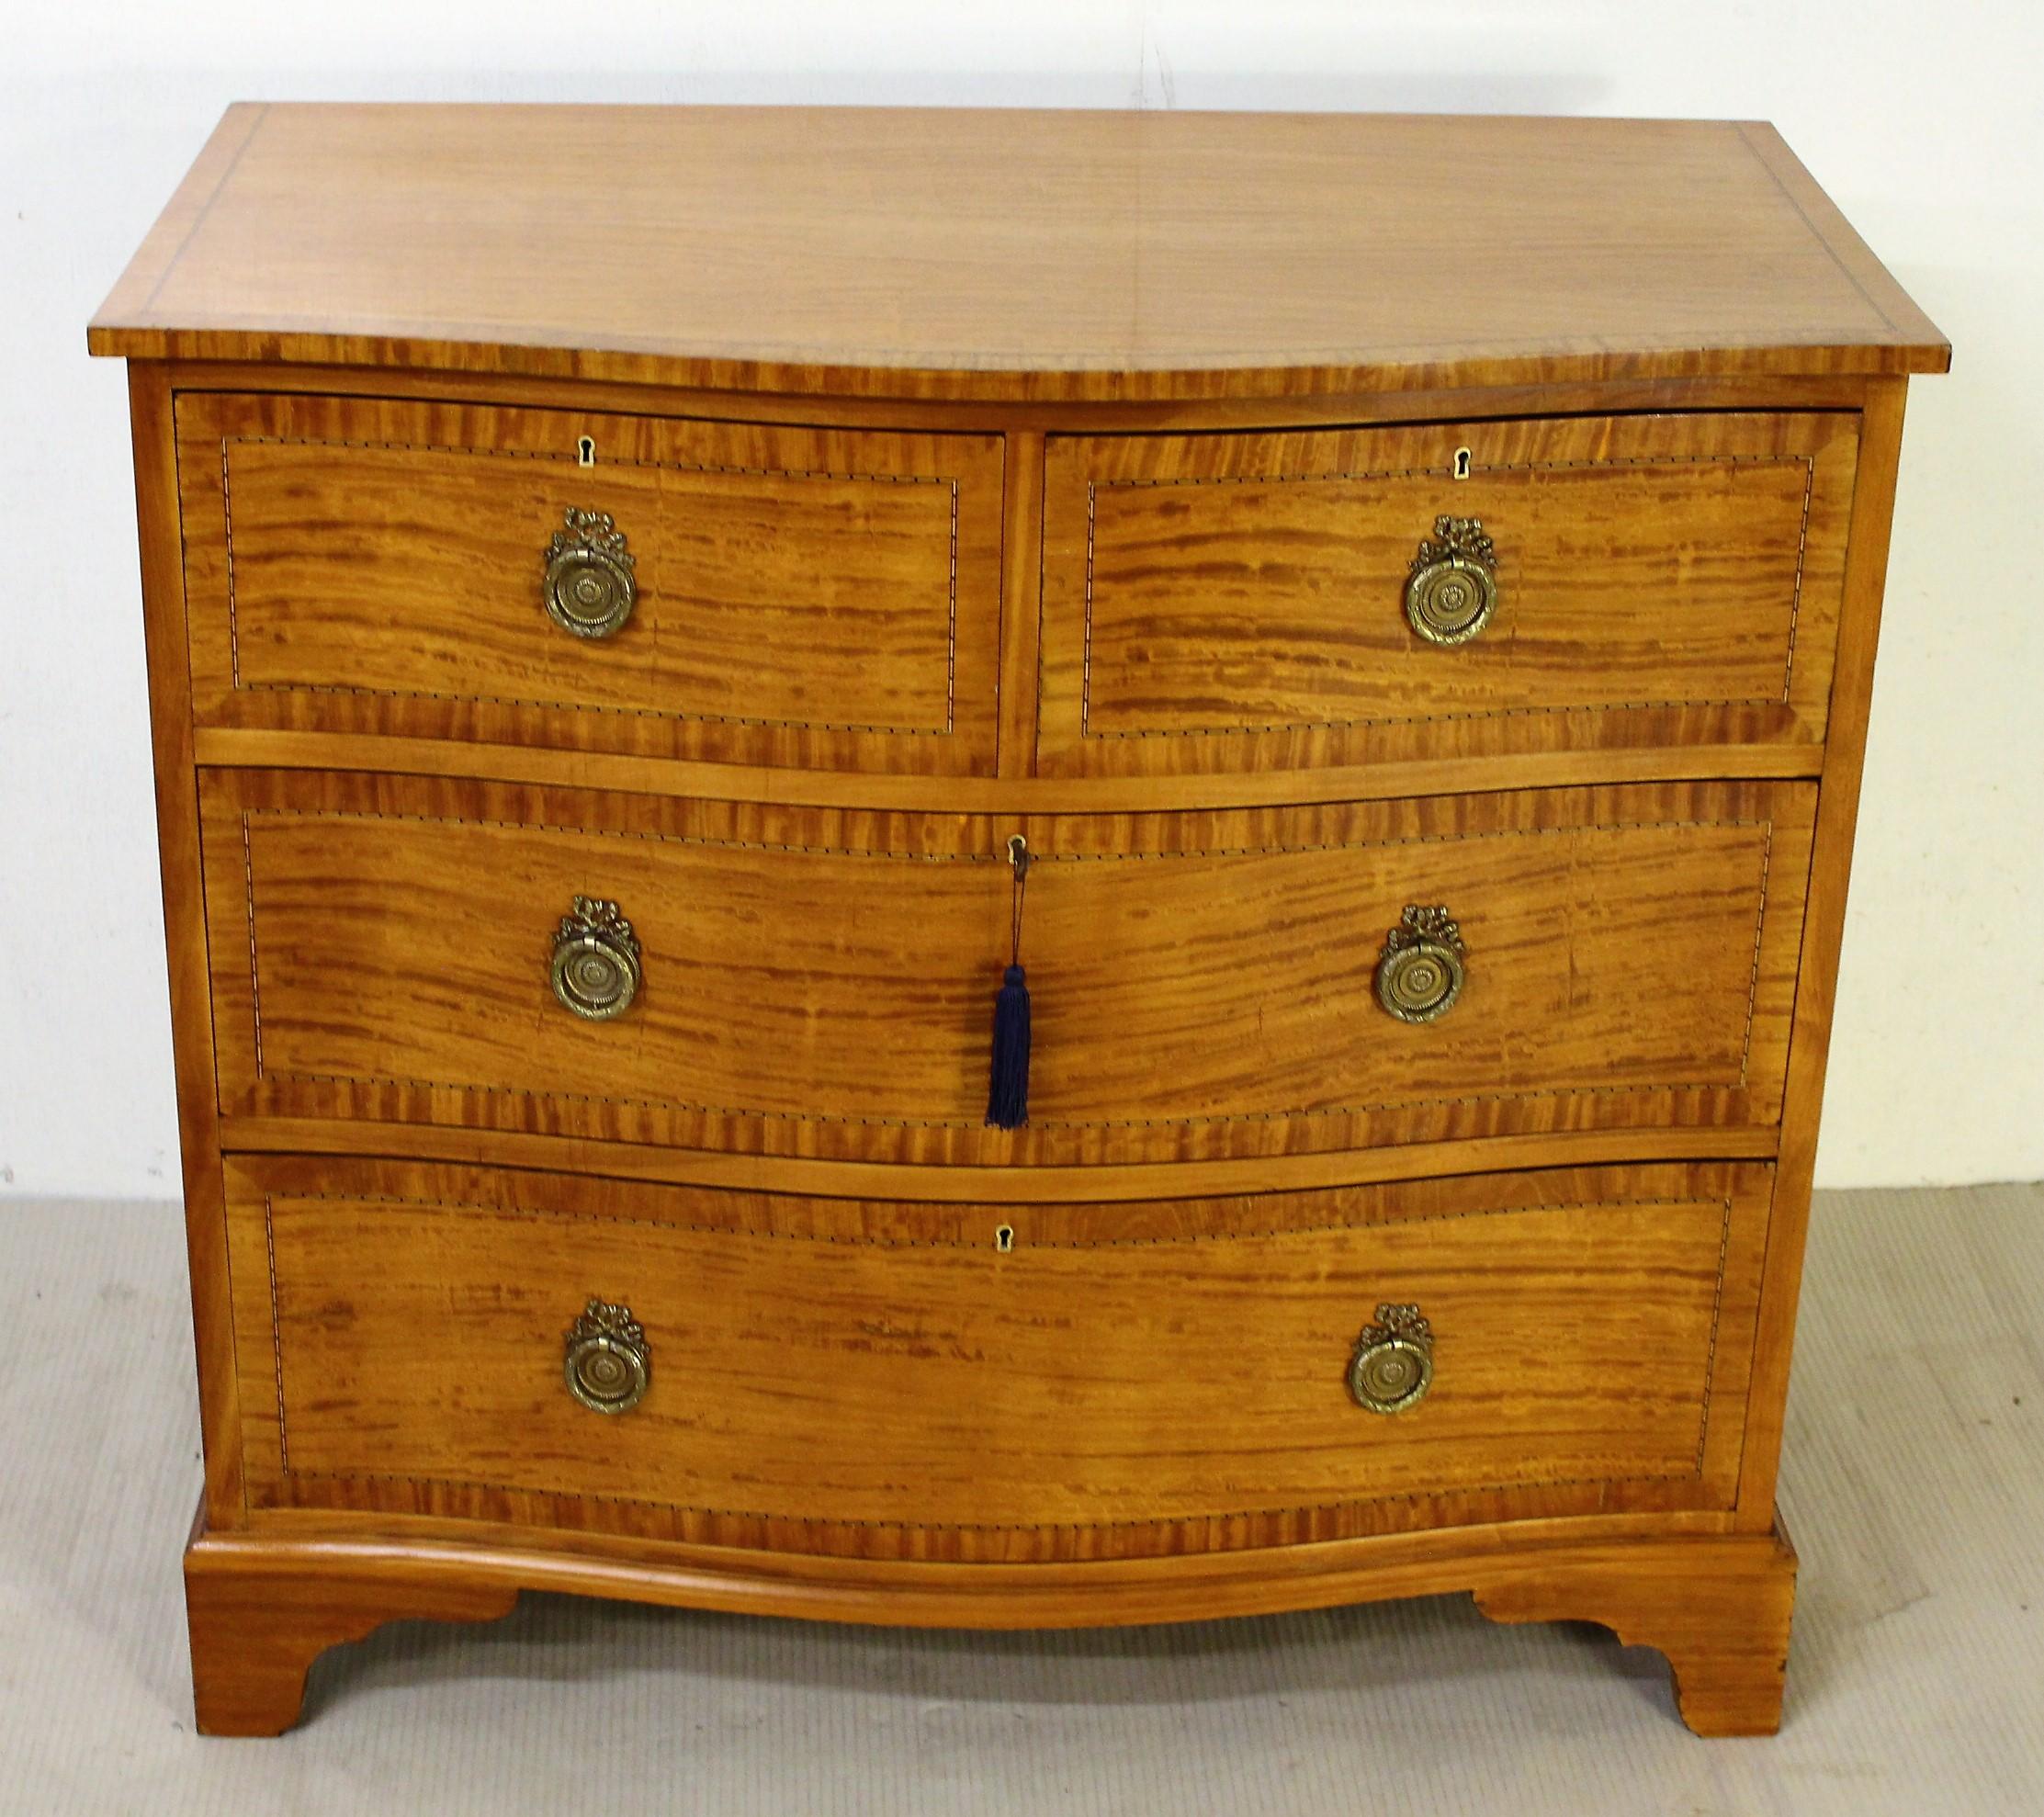 A fine quality Edwardian period inlaid satinwood chest of drawers. Of very good construction in solid satinwood and attractive satinwood veneers onto a mahogany carcas. Of gentle serpentine form and with a series of 2 short over 2 long drawers. The